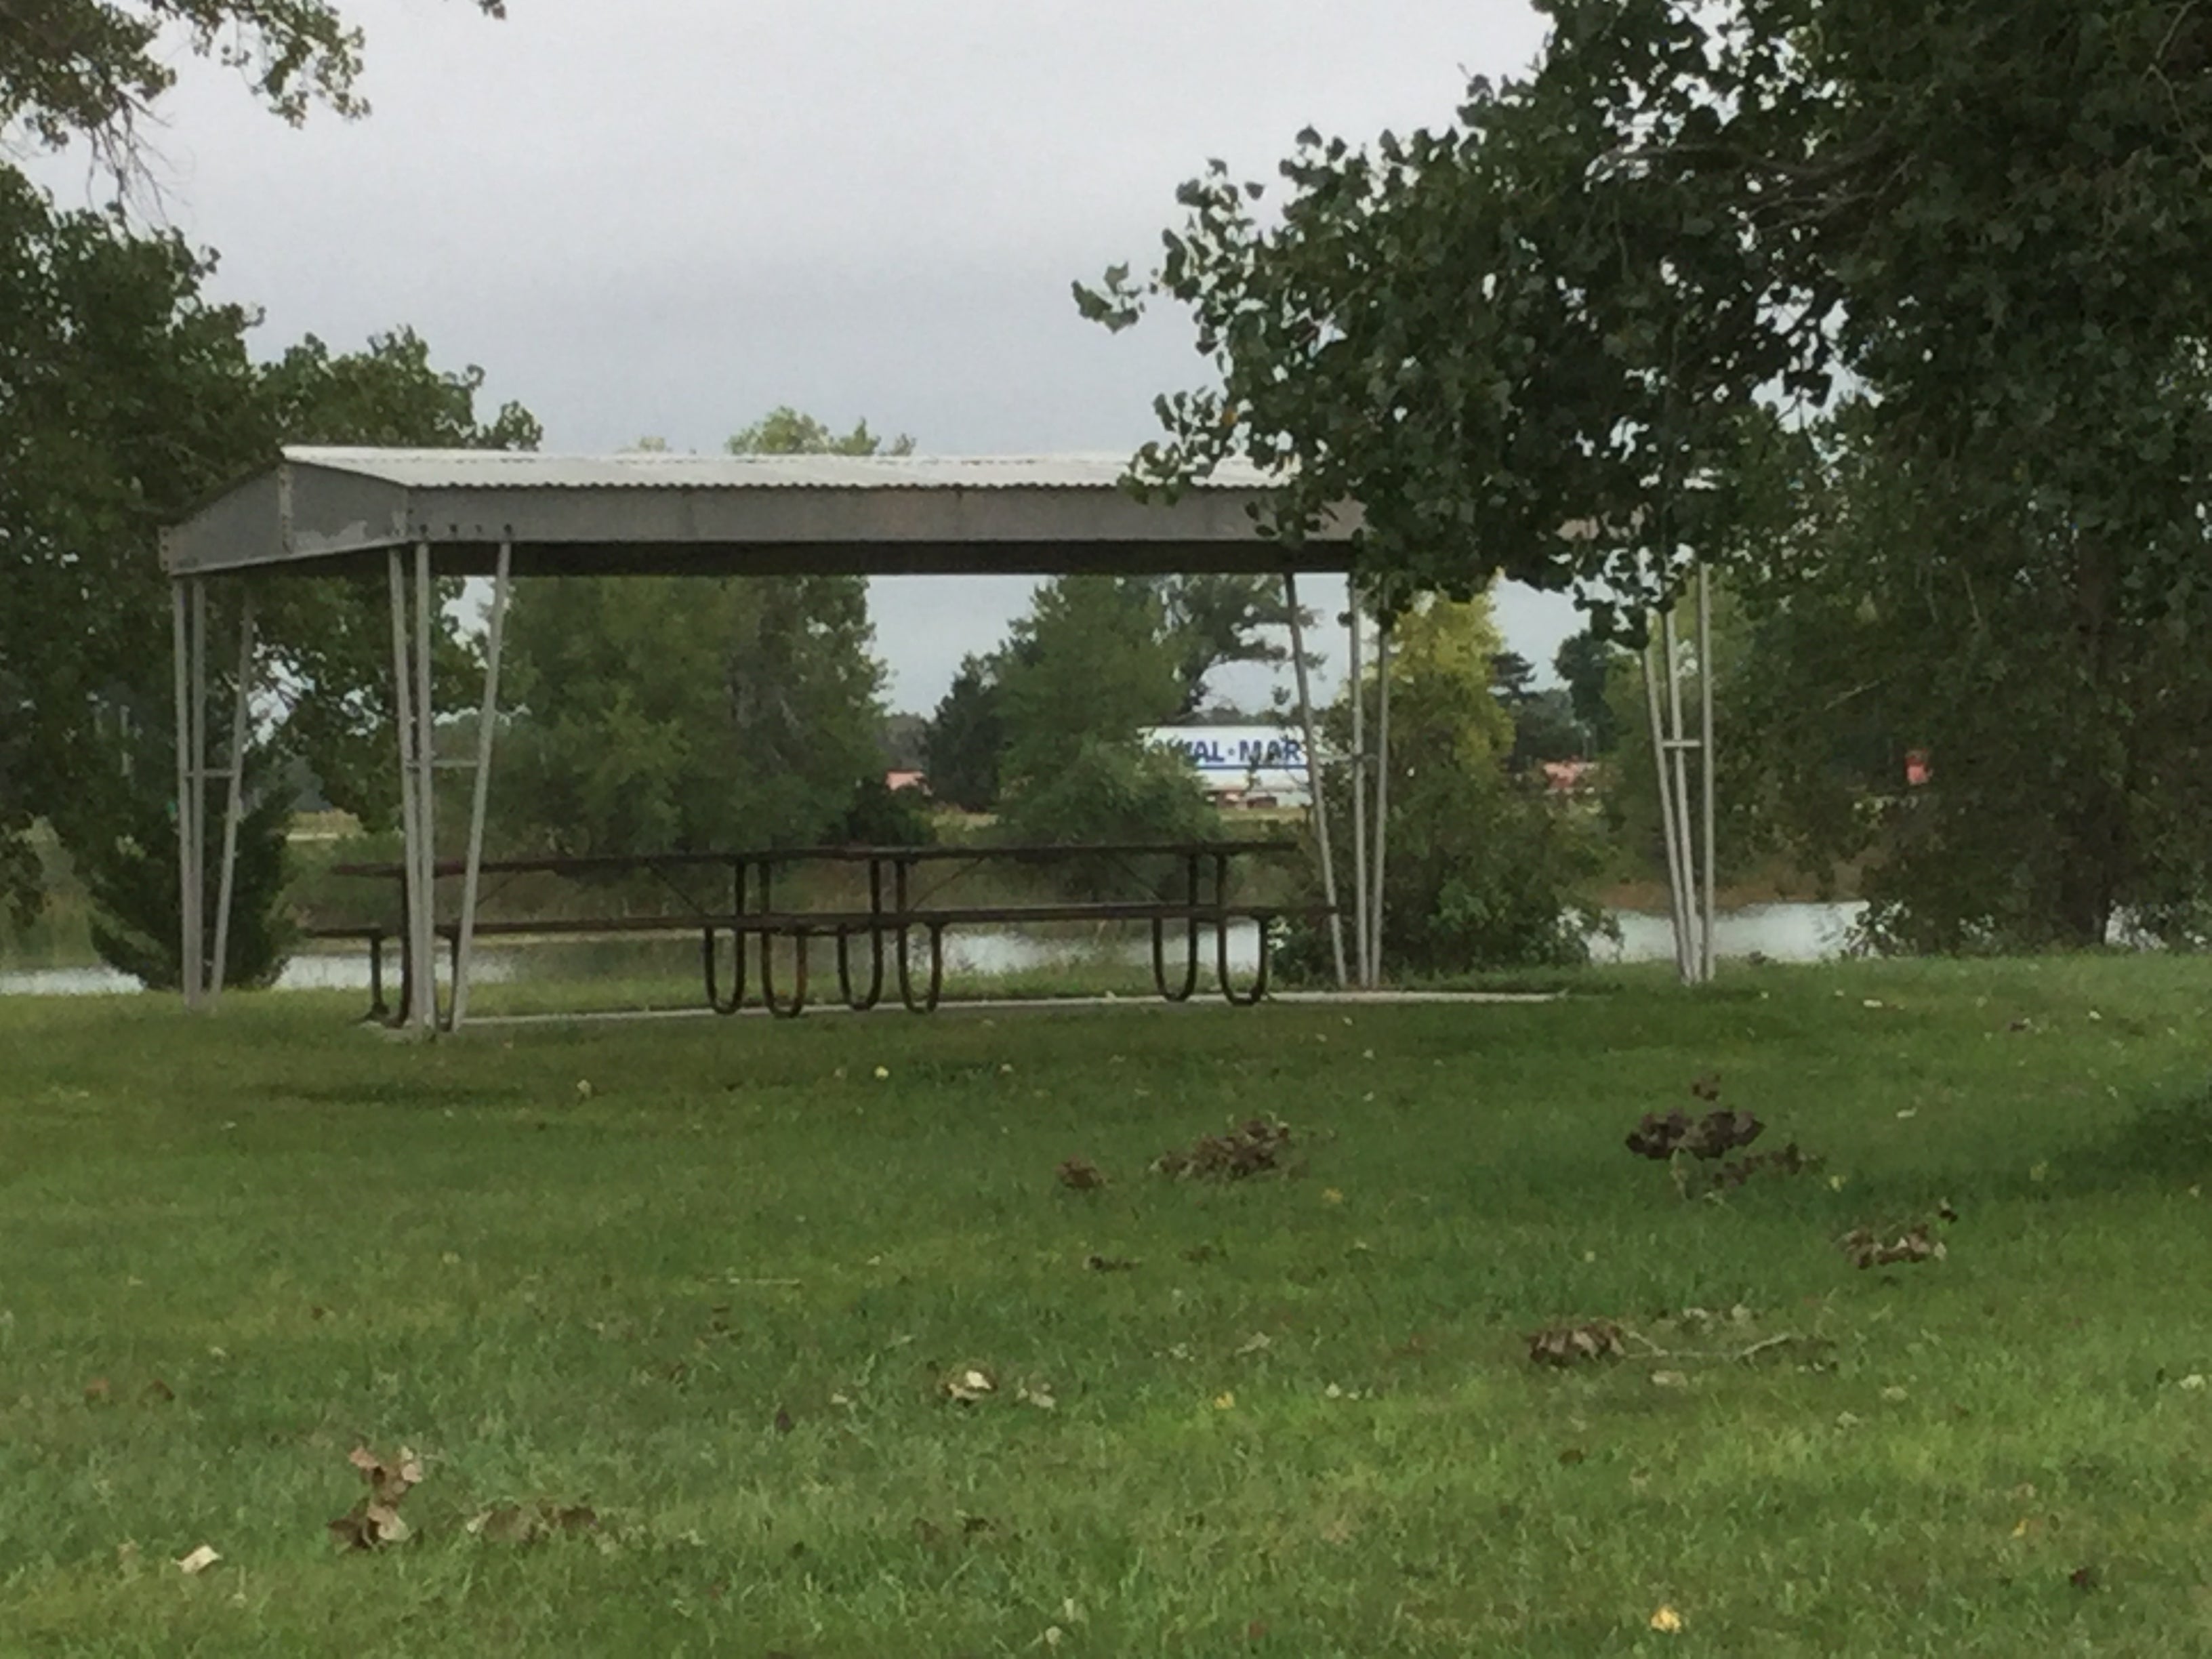 1 of 4 picnic shelters